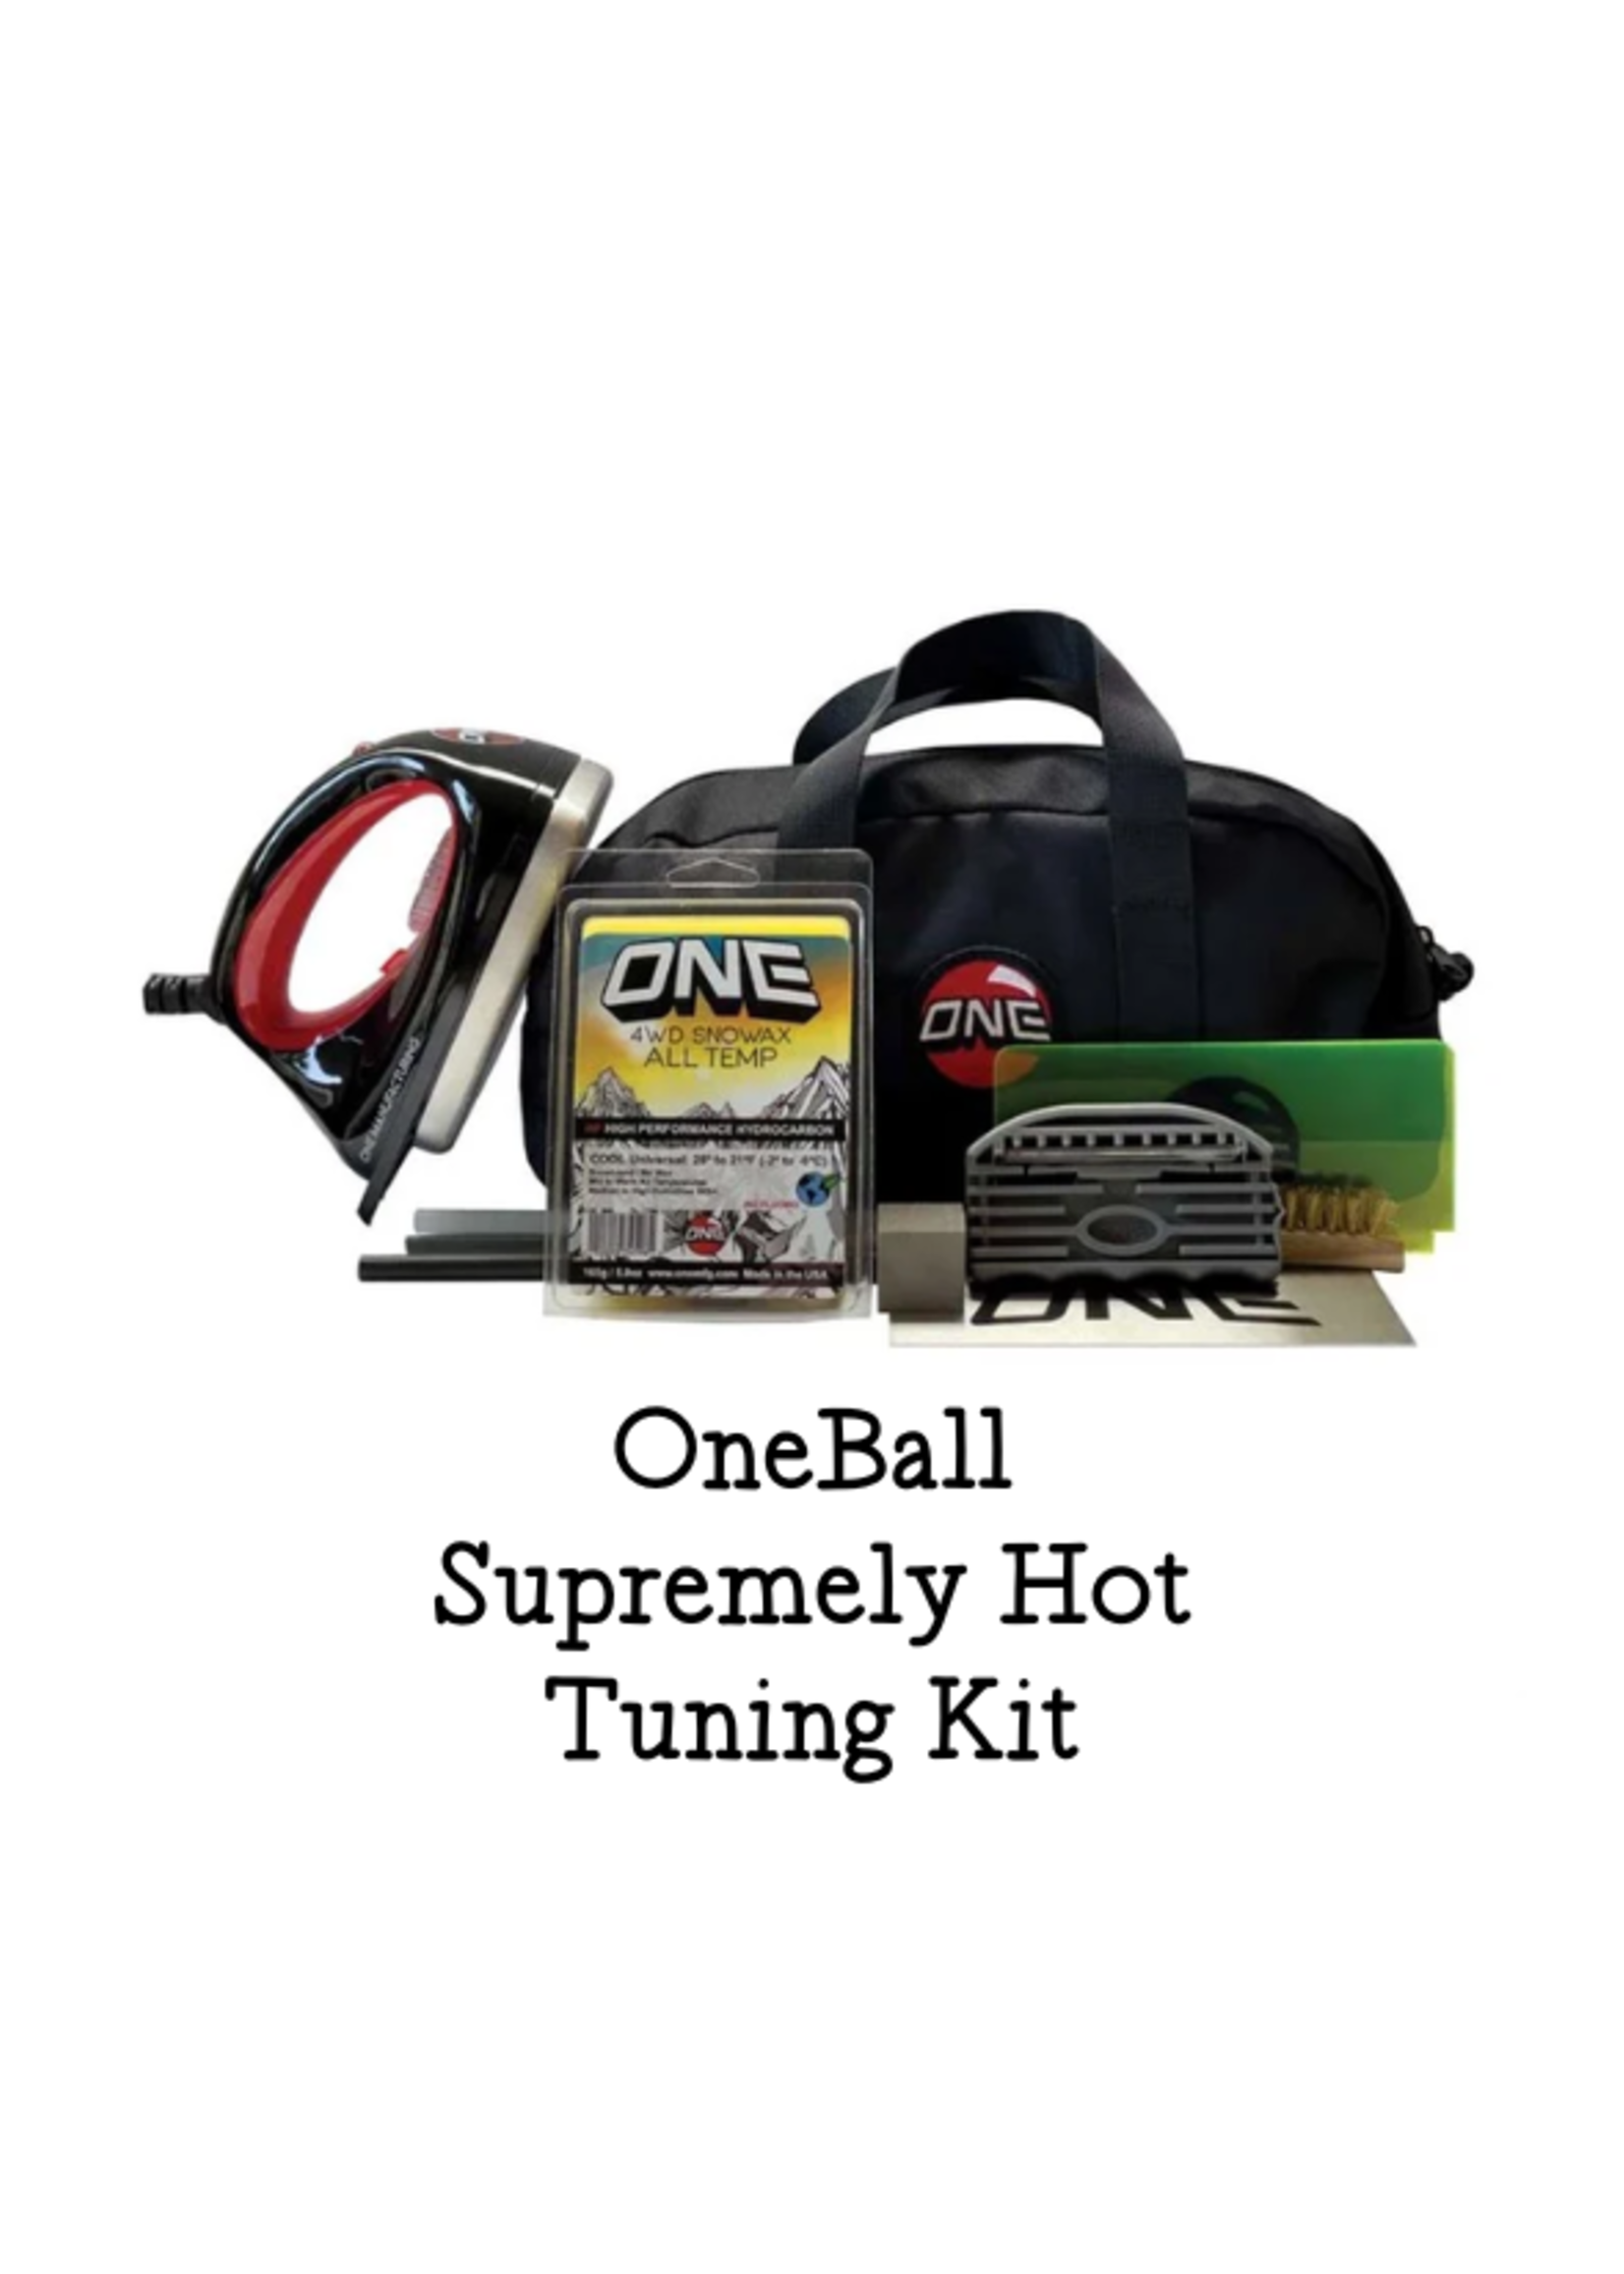 One ball SUPREMELY HOT KIT